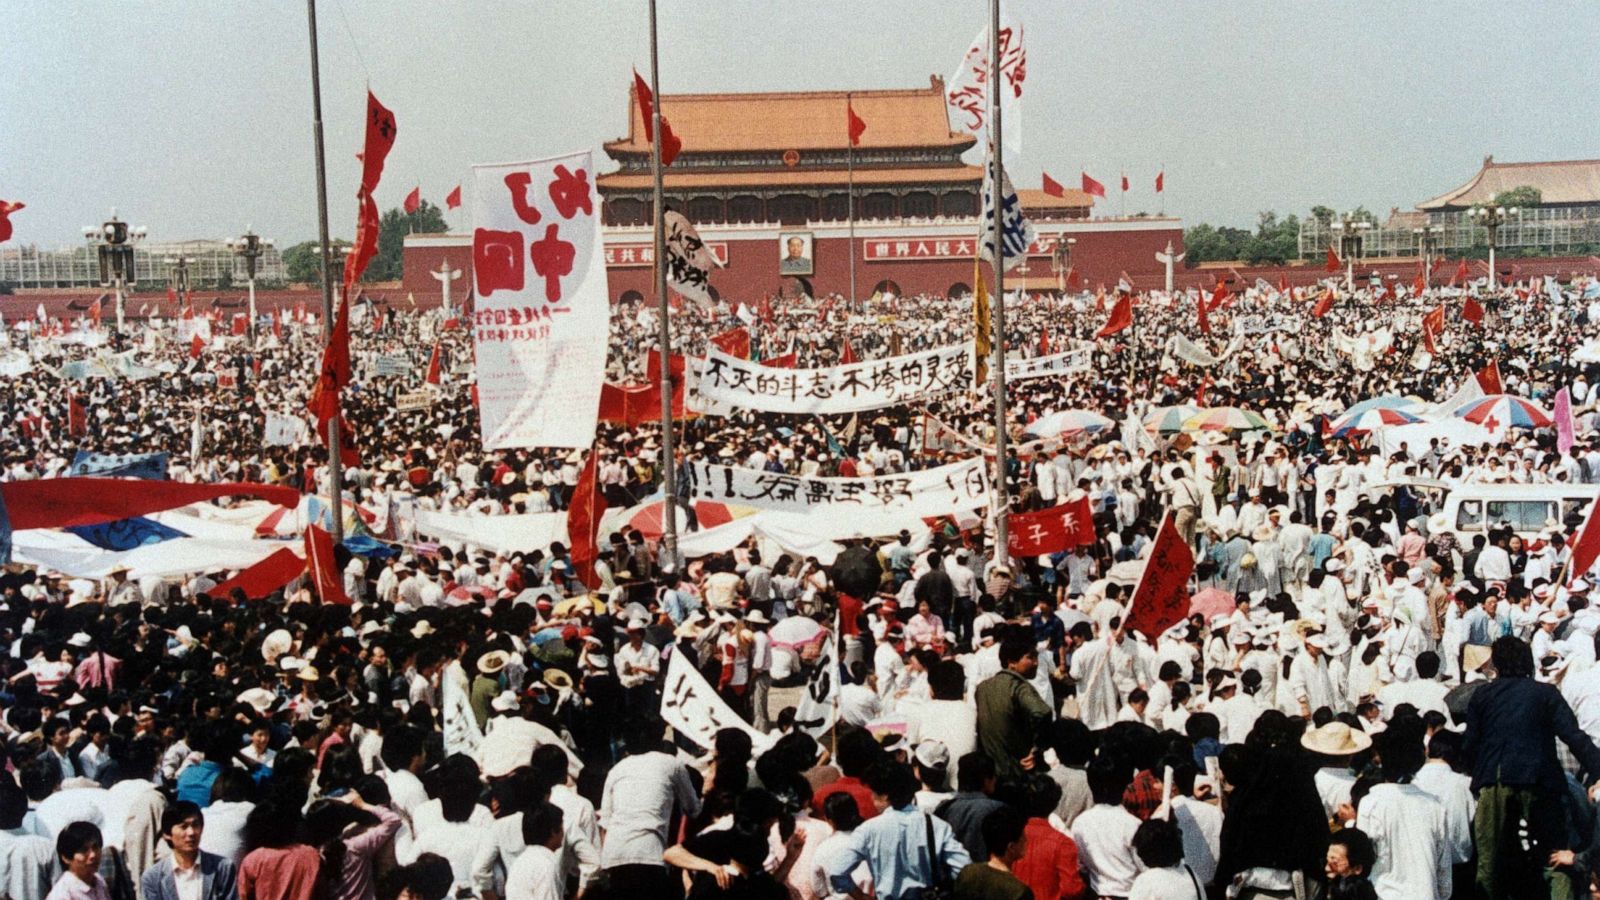 What to know about Tiananmen Square on the 30th anniversary of the crackdown - ABC News